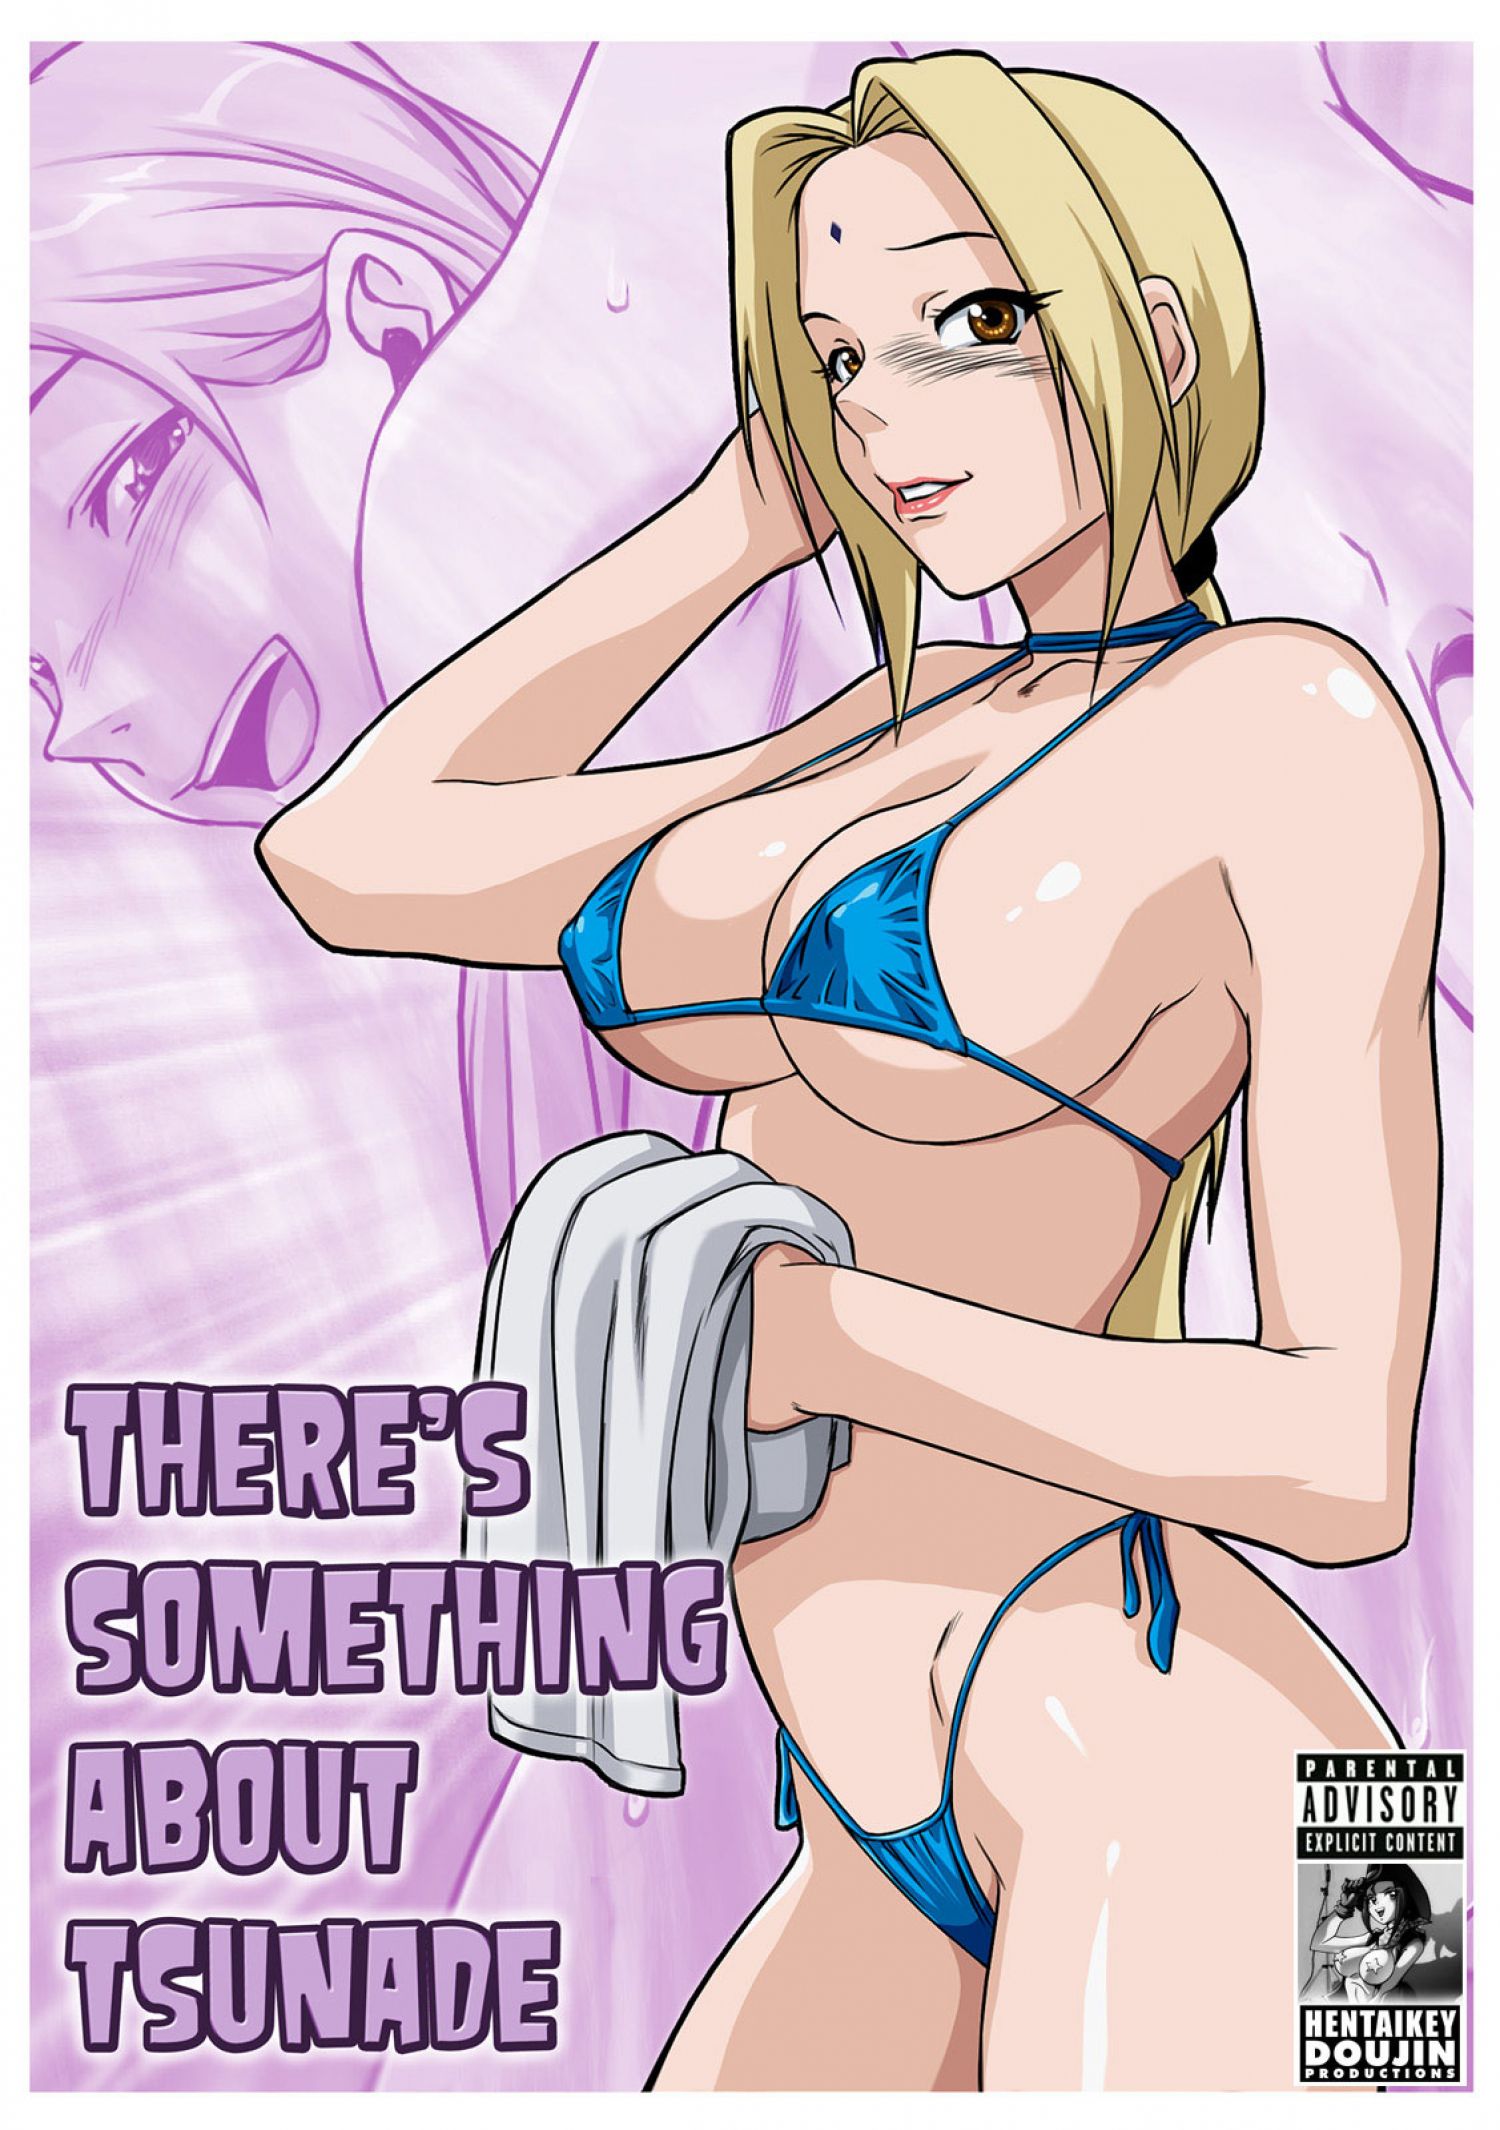 There’s Something About Tsunade (Naruto) [Romulo Melkor Mancin] - 1 . There...